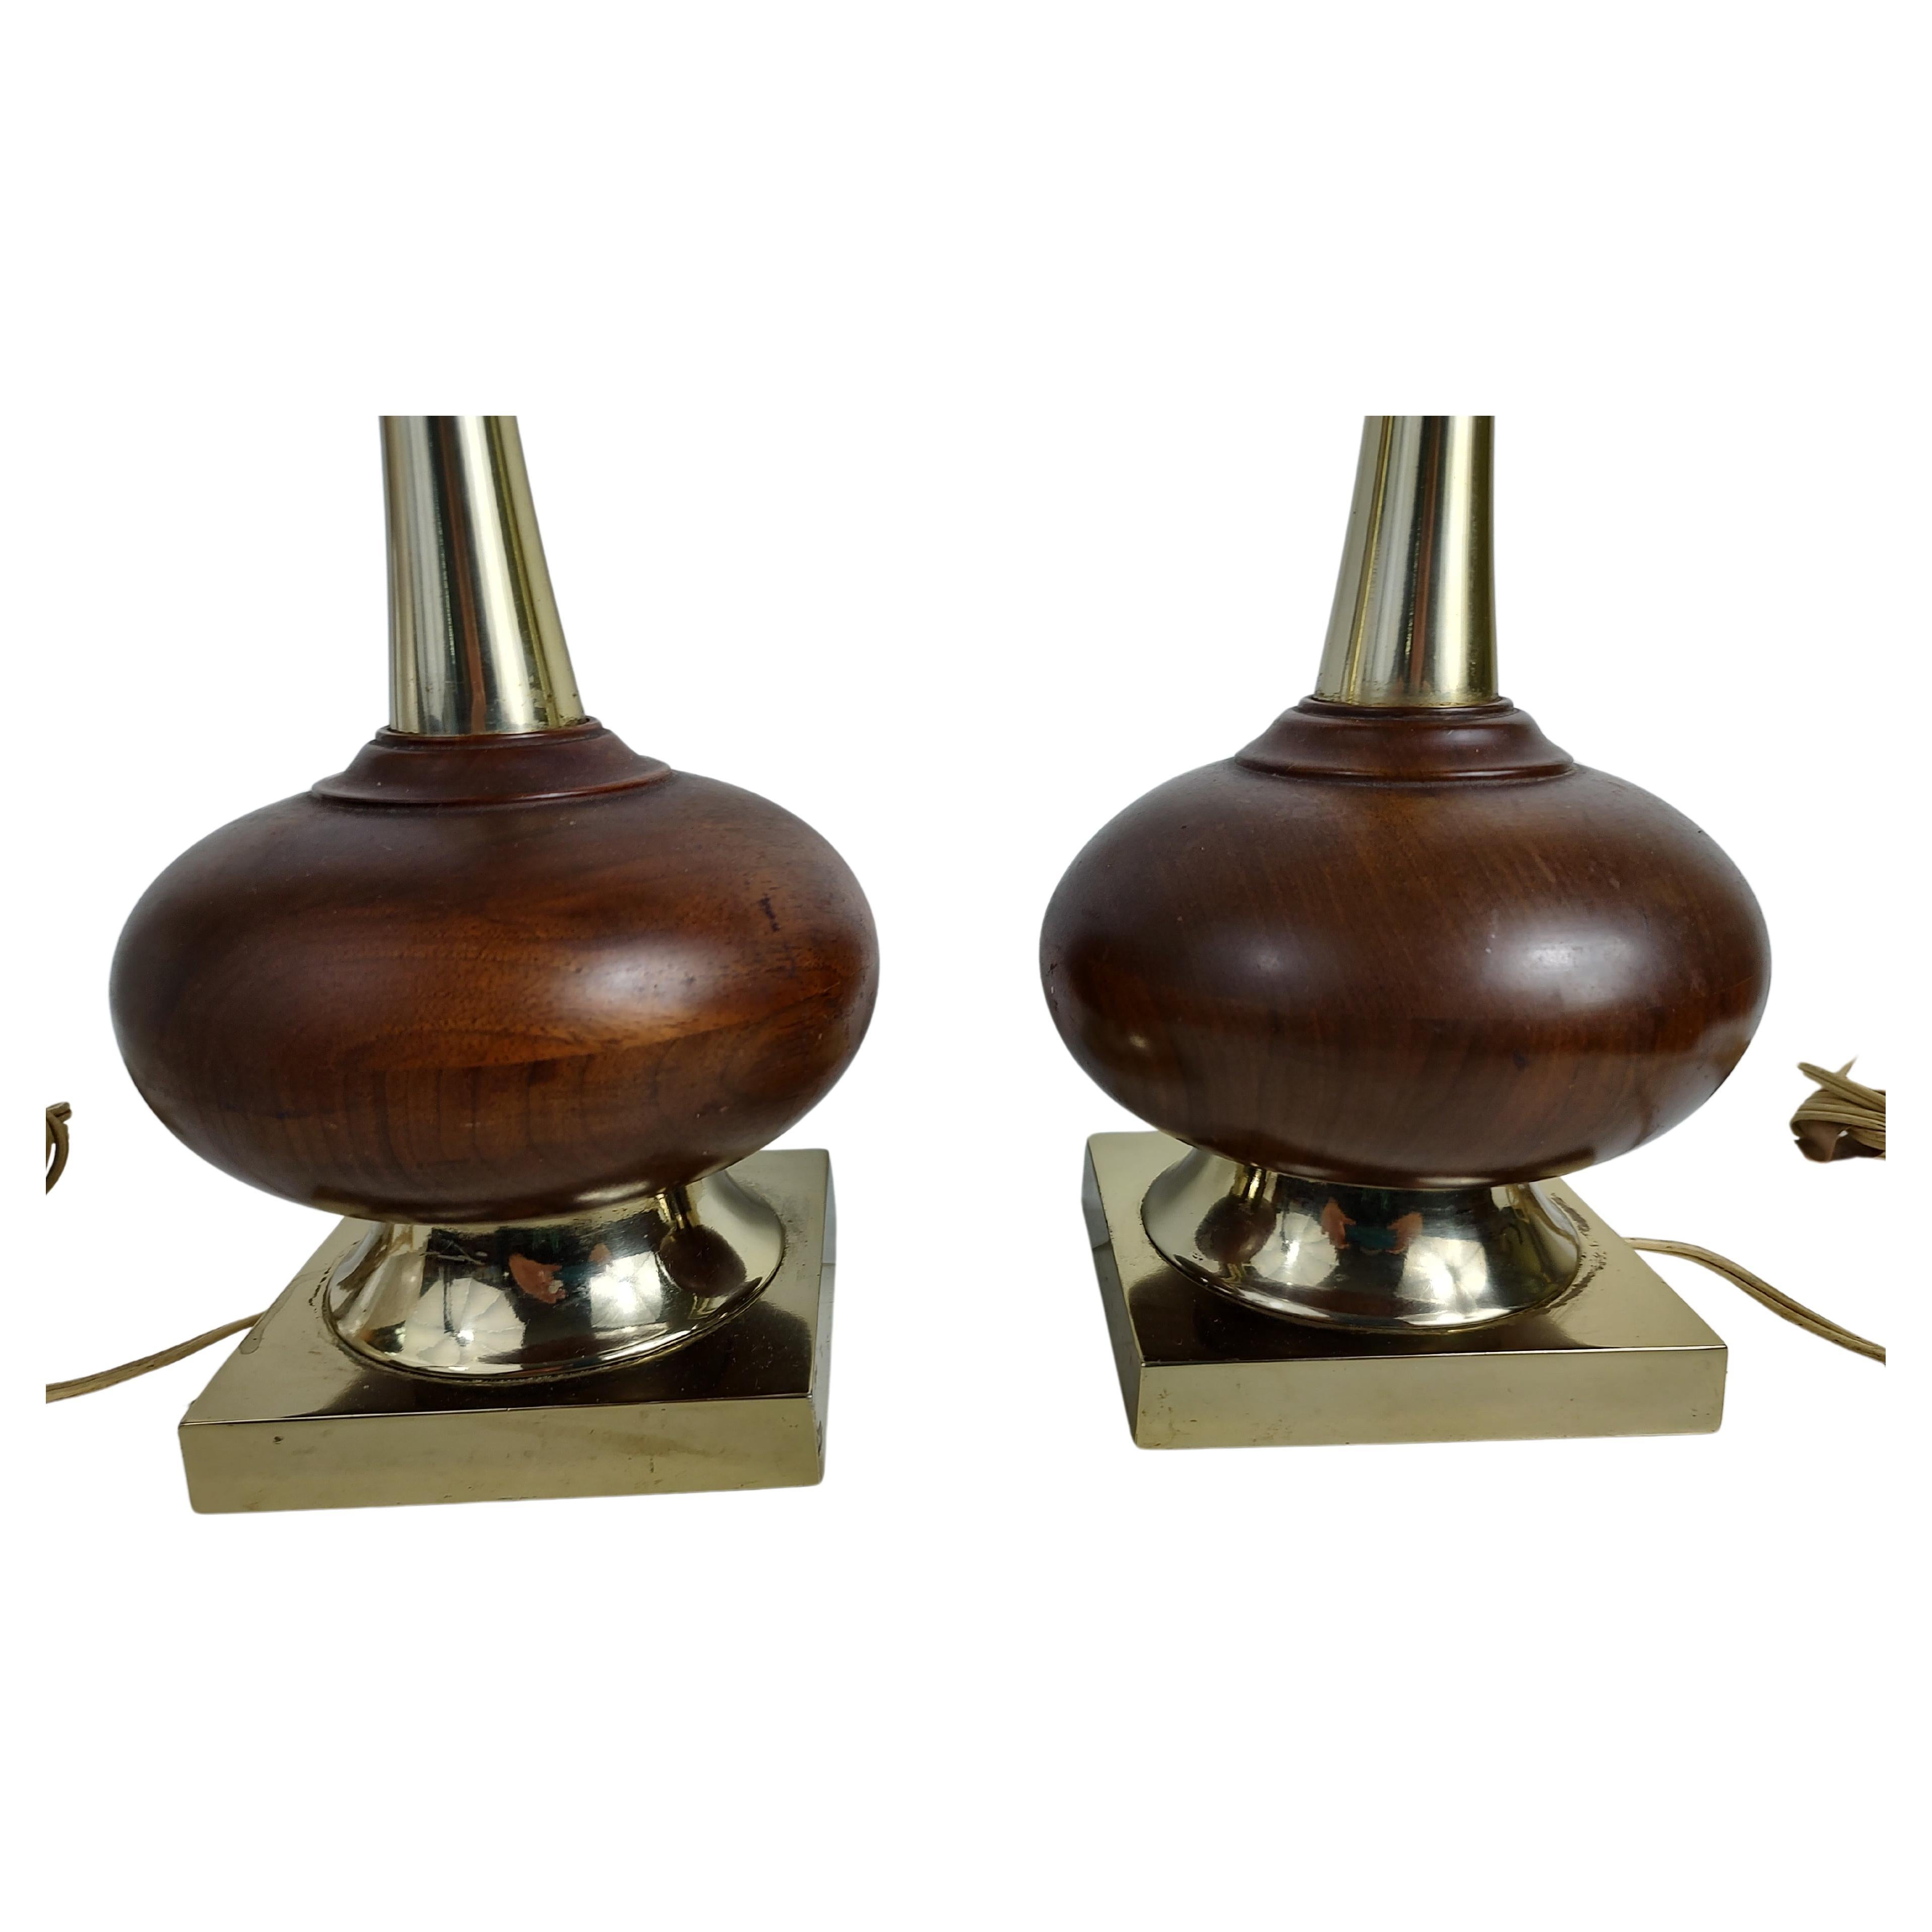 Pair of Tall Walnut & Brass Mid-Century Modern Table Lamps attrib Laurel Lamp co In Good Condition For Sale In Port Jervis, NY